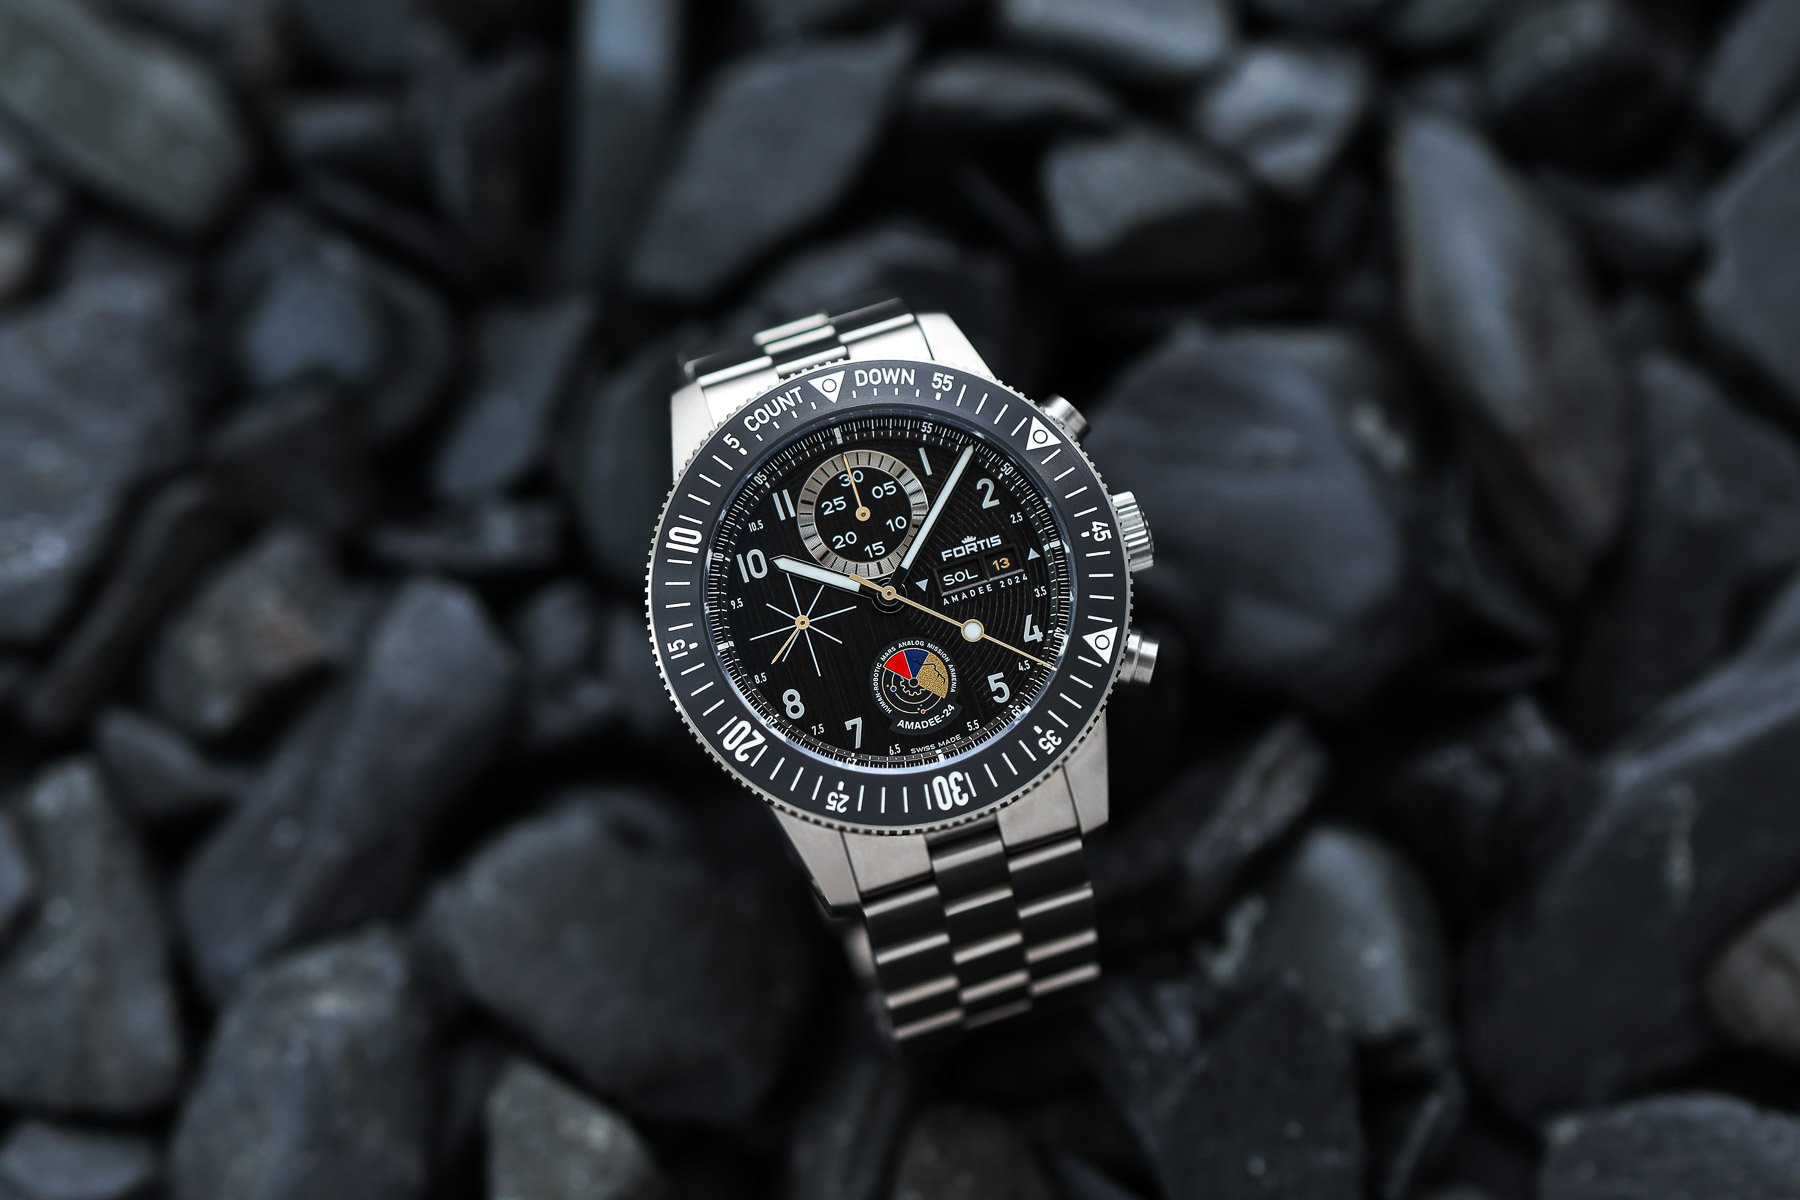 Introducing: The Fortis AMADEE-24 Mars Analog Mission Timer